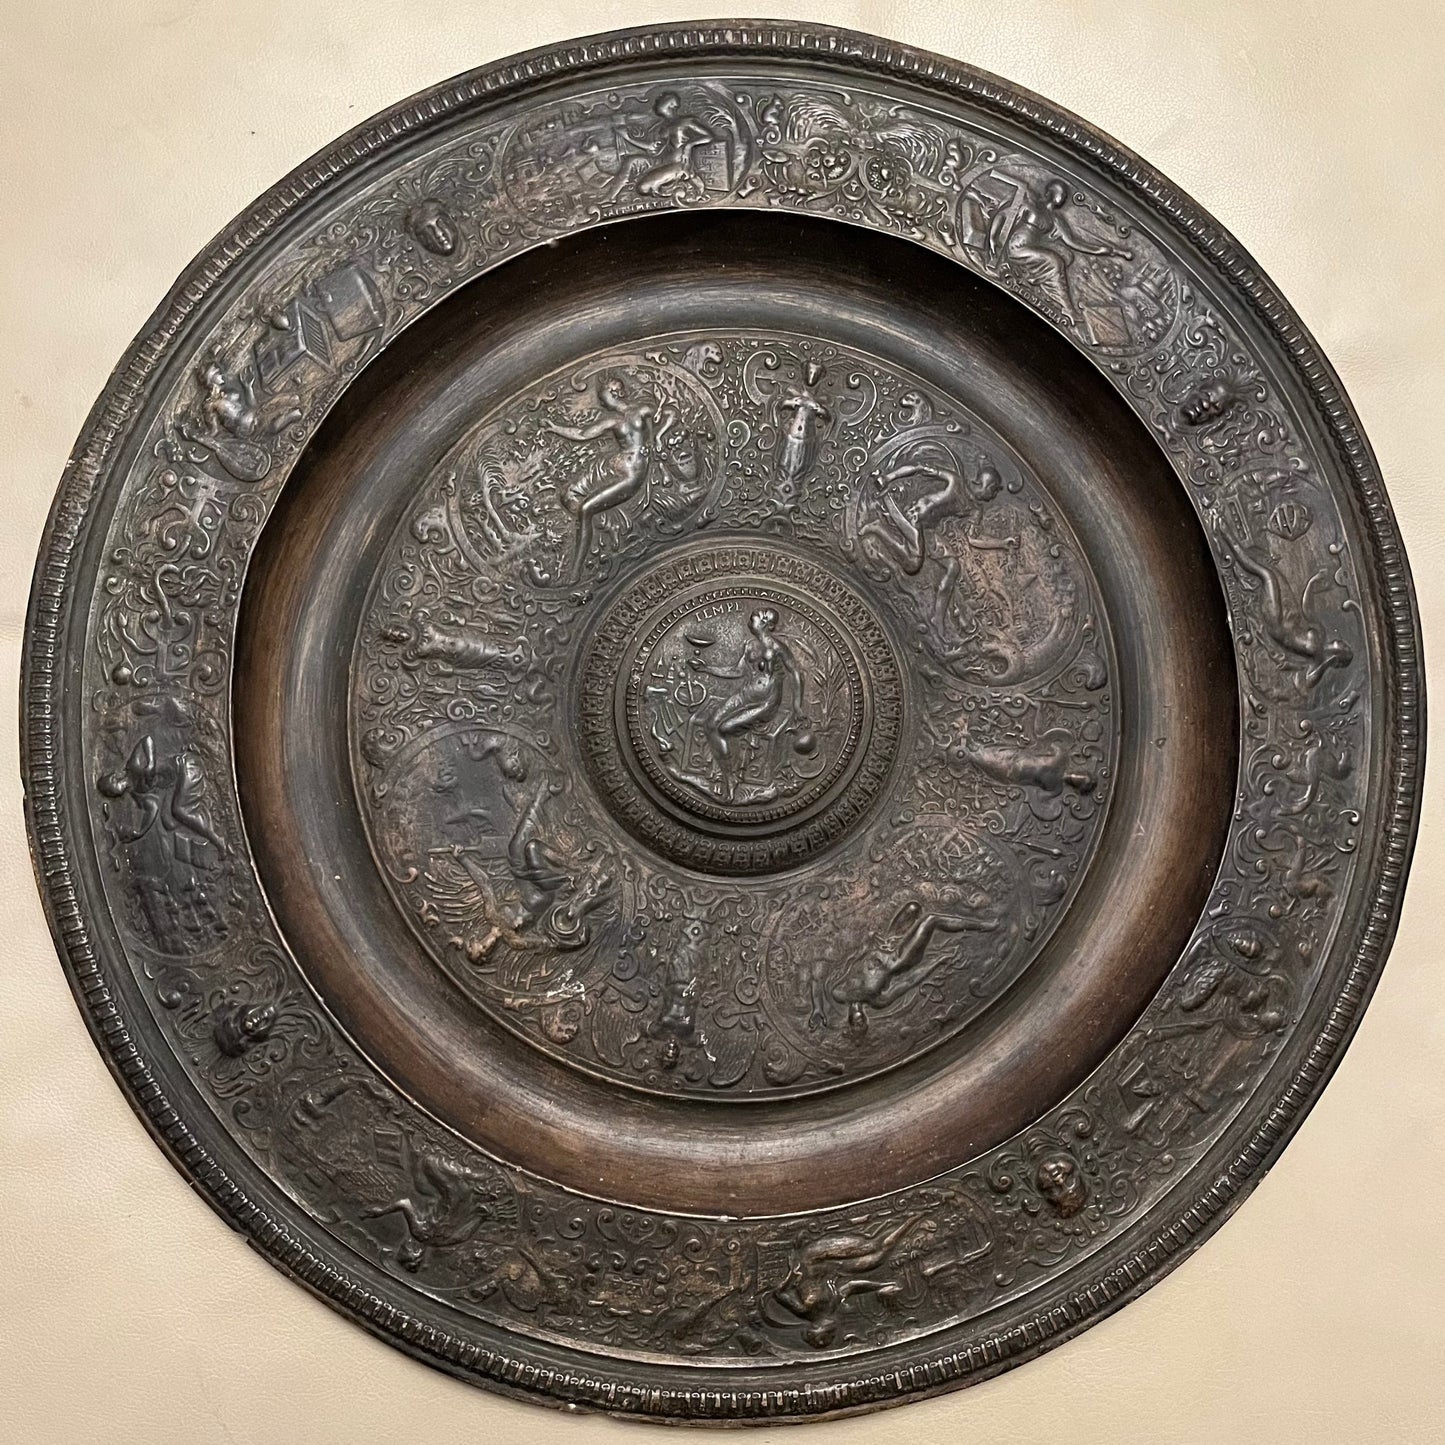 Plaster dish copy of the Briot dish from the Louvres